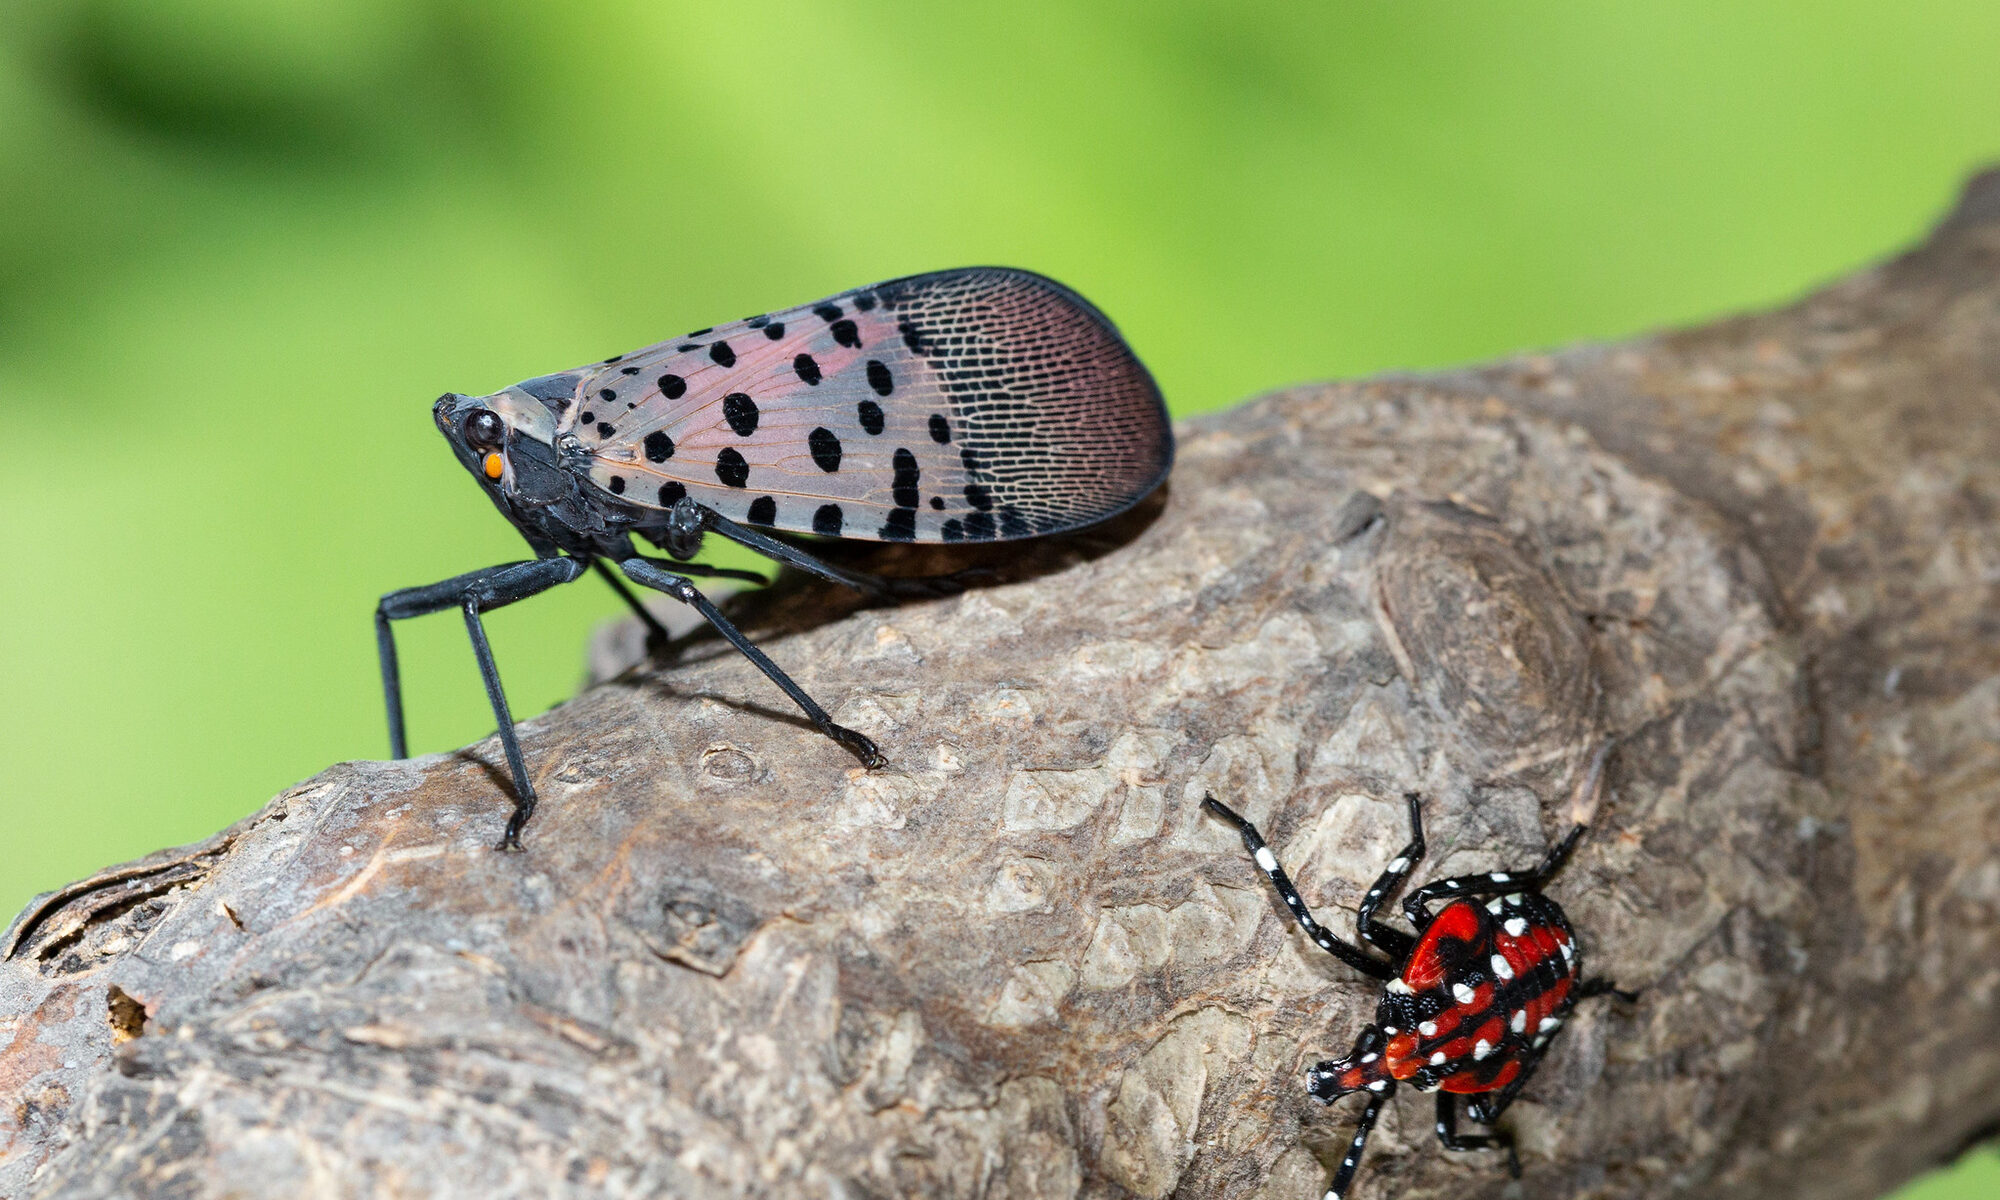 Spotted lanternfly adult and nymph on branch